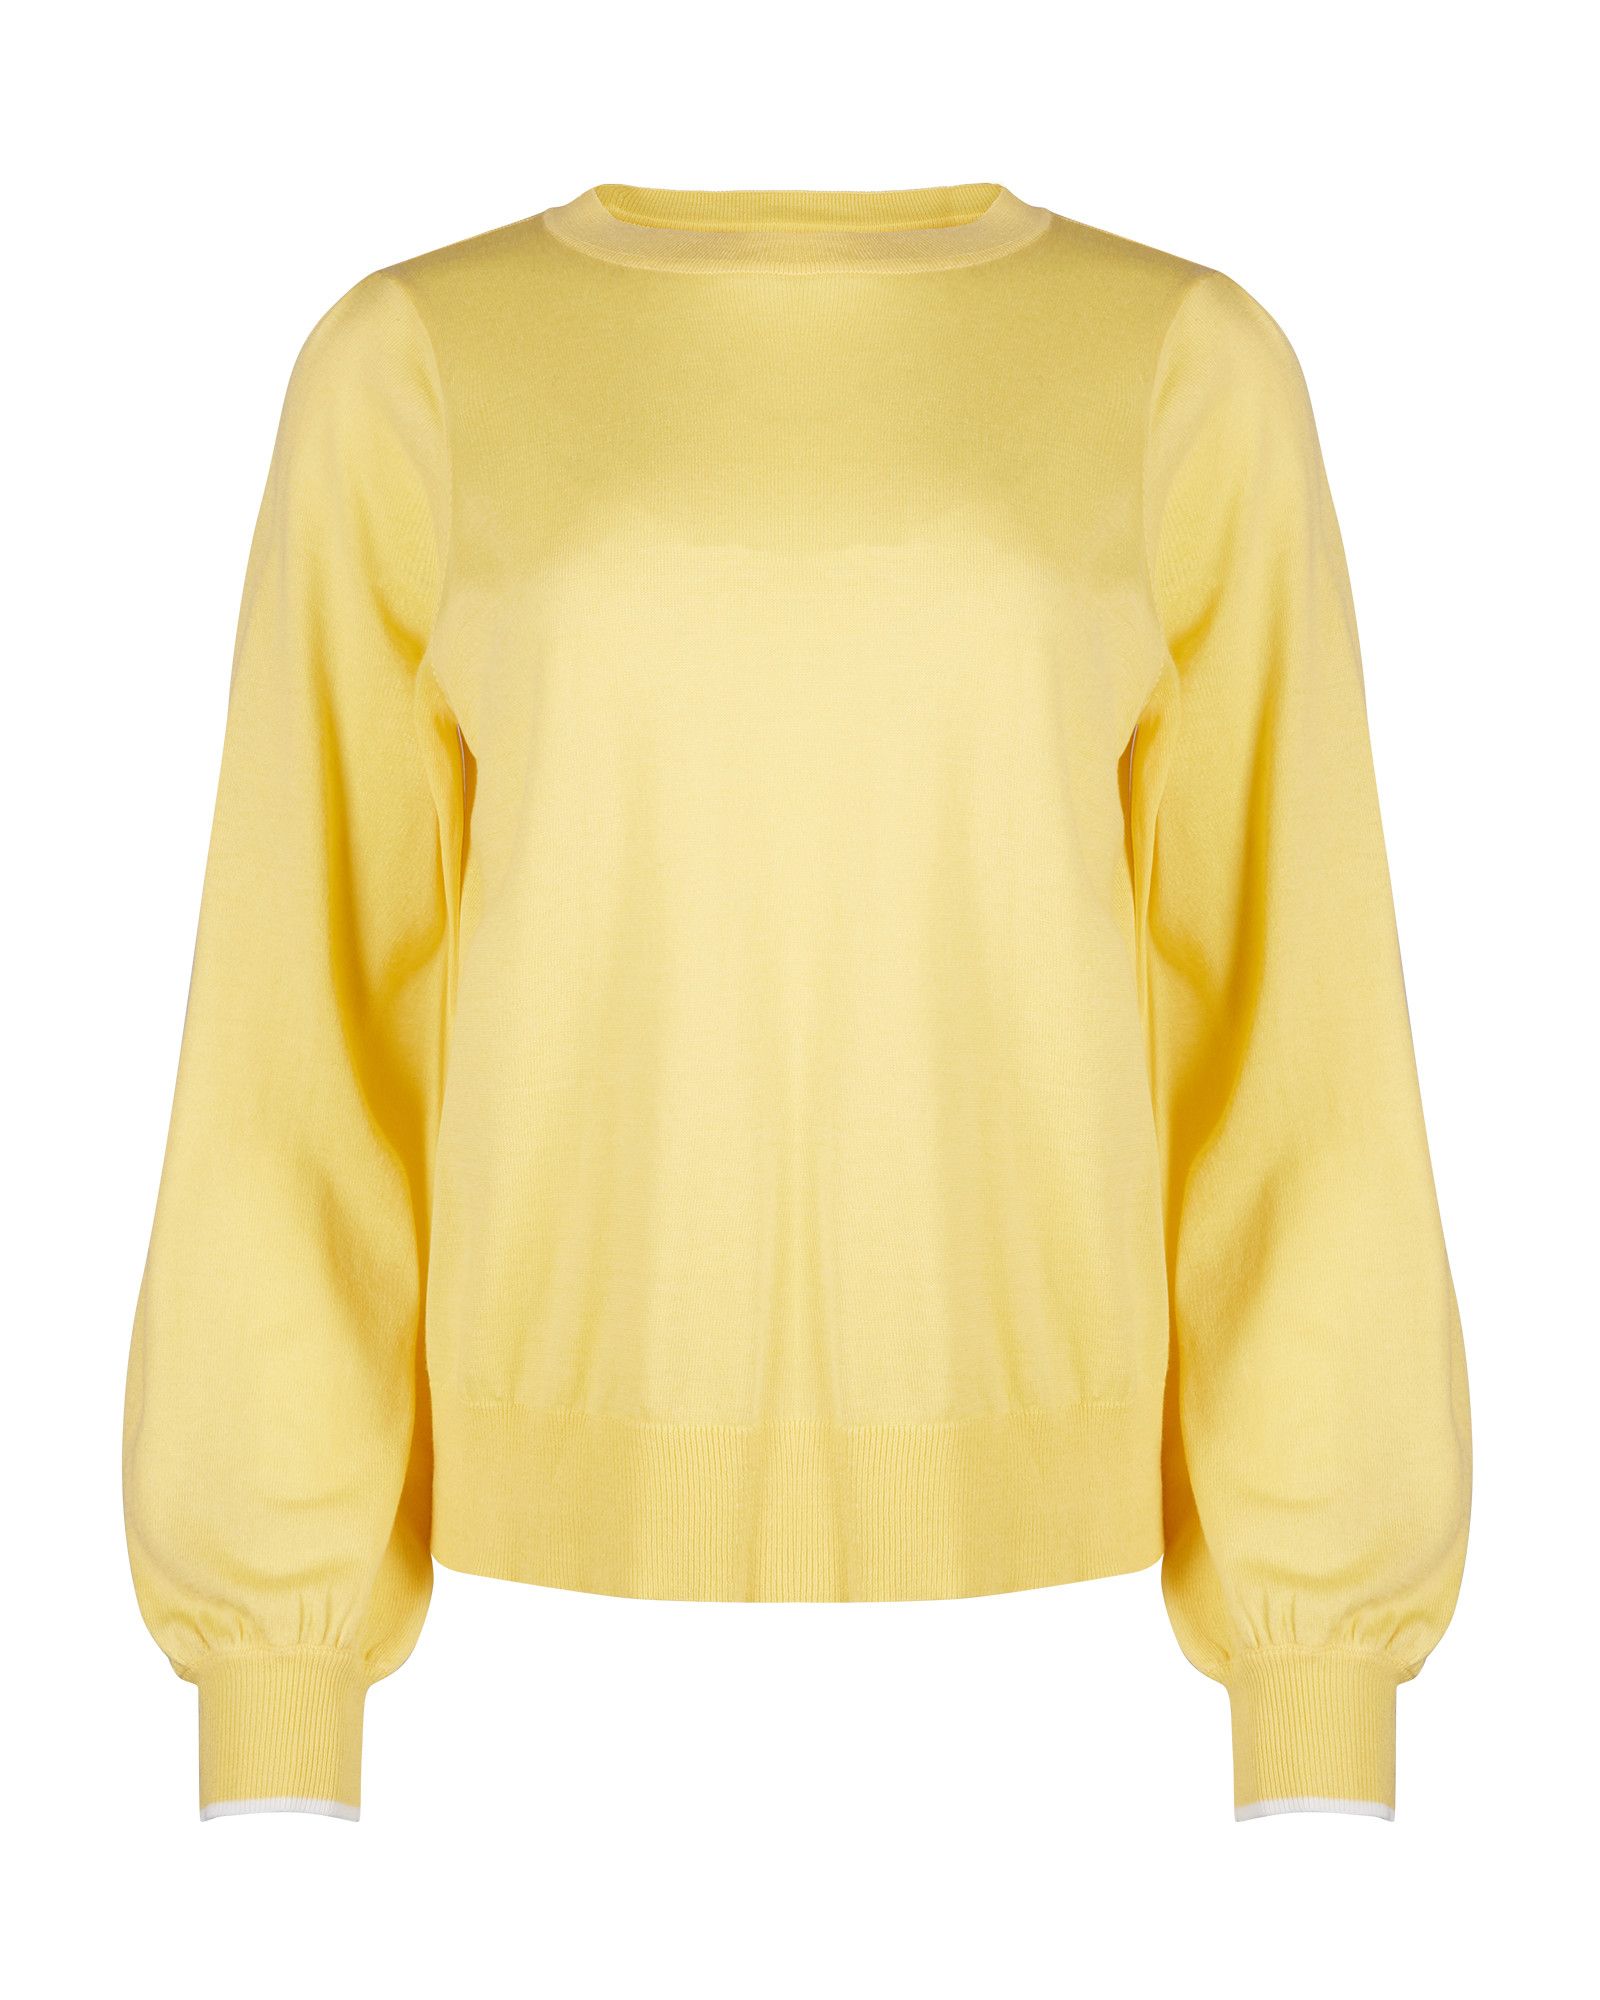 Tuck Detail Yellow Knitted Jumper | Oliver Bonas